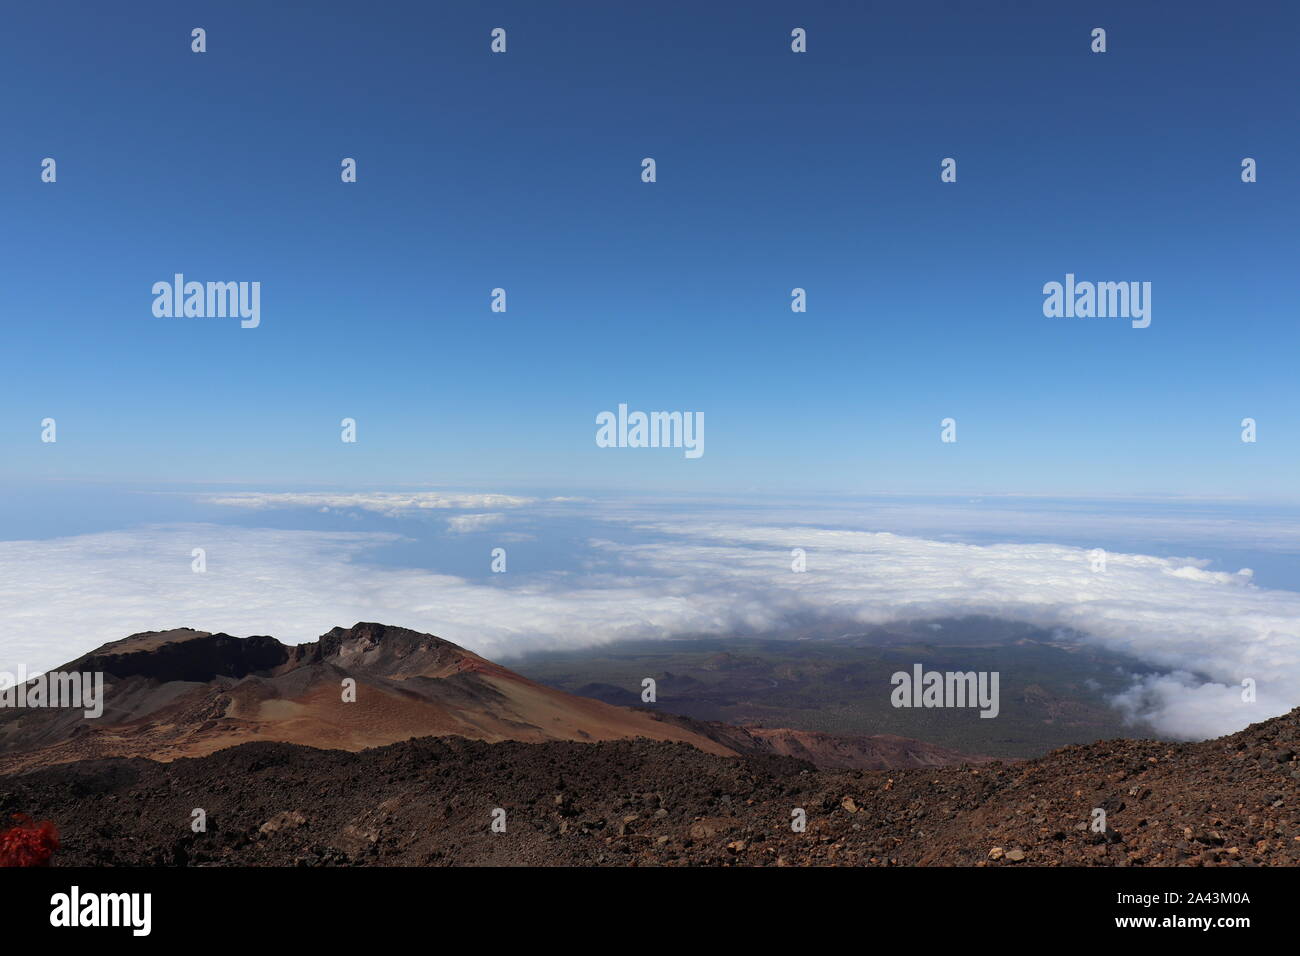 Nature. Mountains. Backpacking. Freedom. Clouds. Tenerife. Volcano. Above the clouds. Sky line. Stock Photo